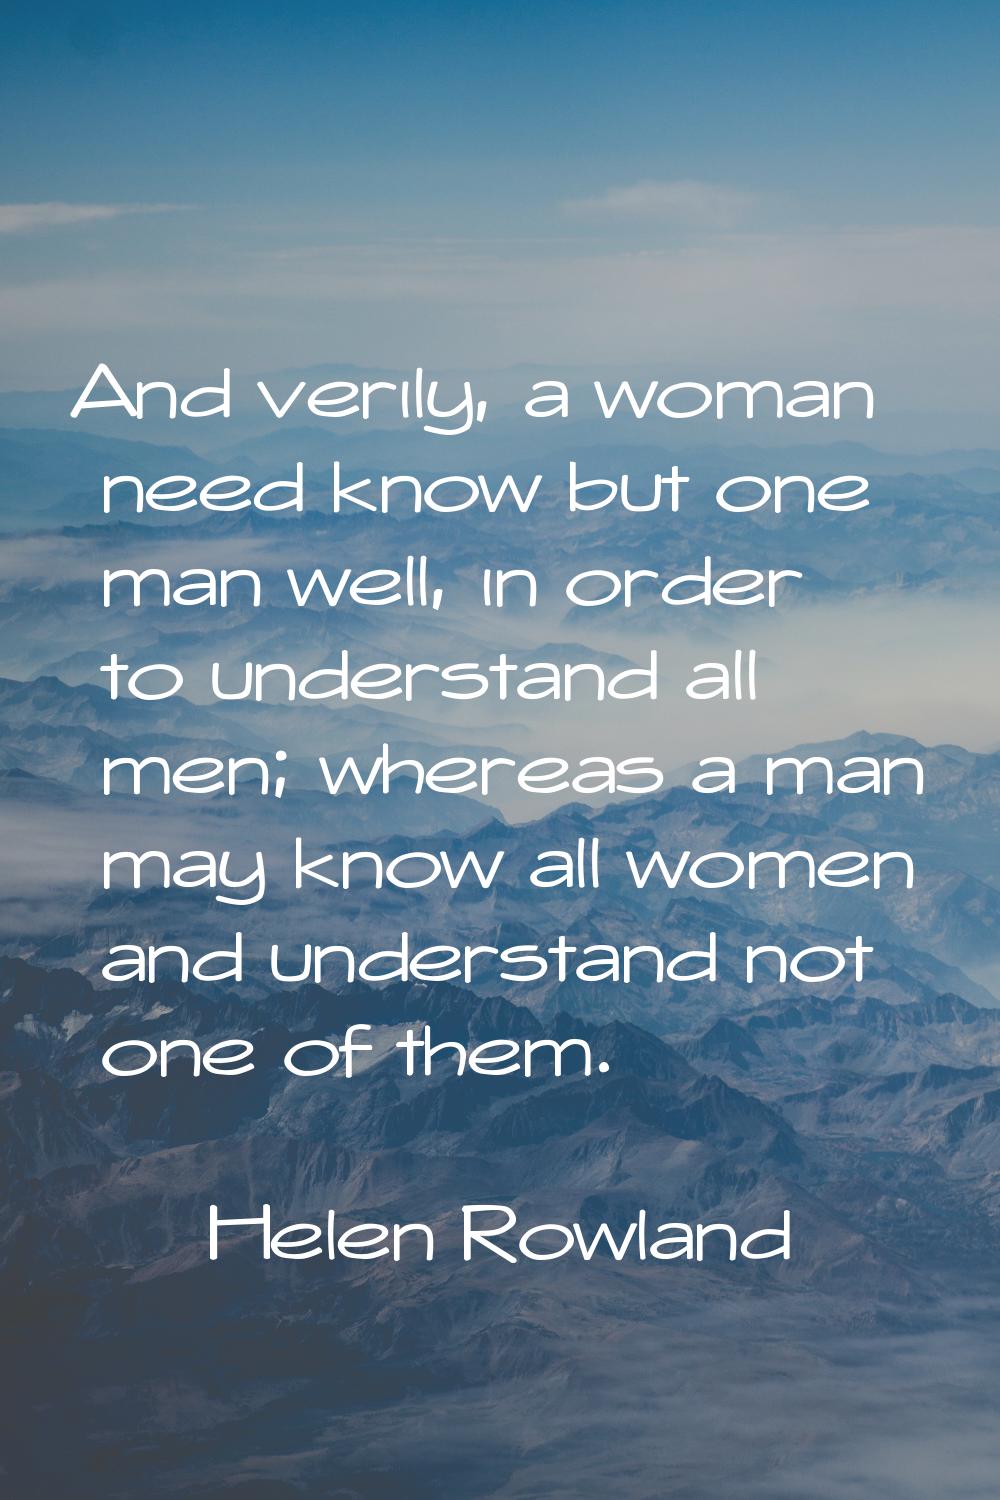 And verily, a woman need know but one man well, in order to understand all men; whereas a man may k